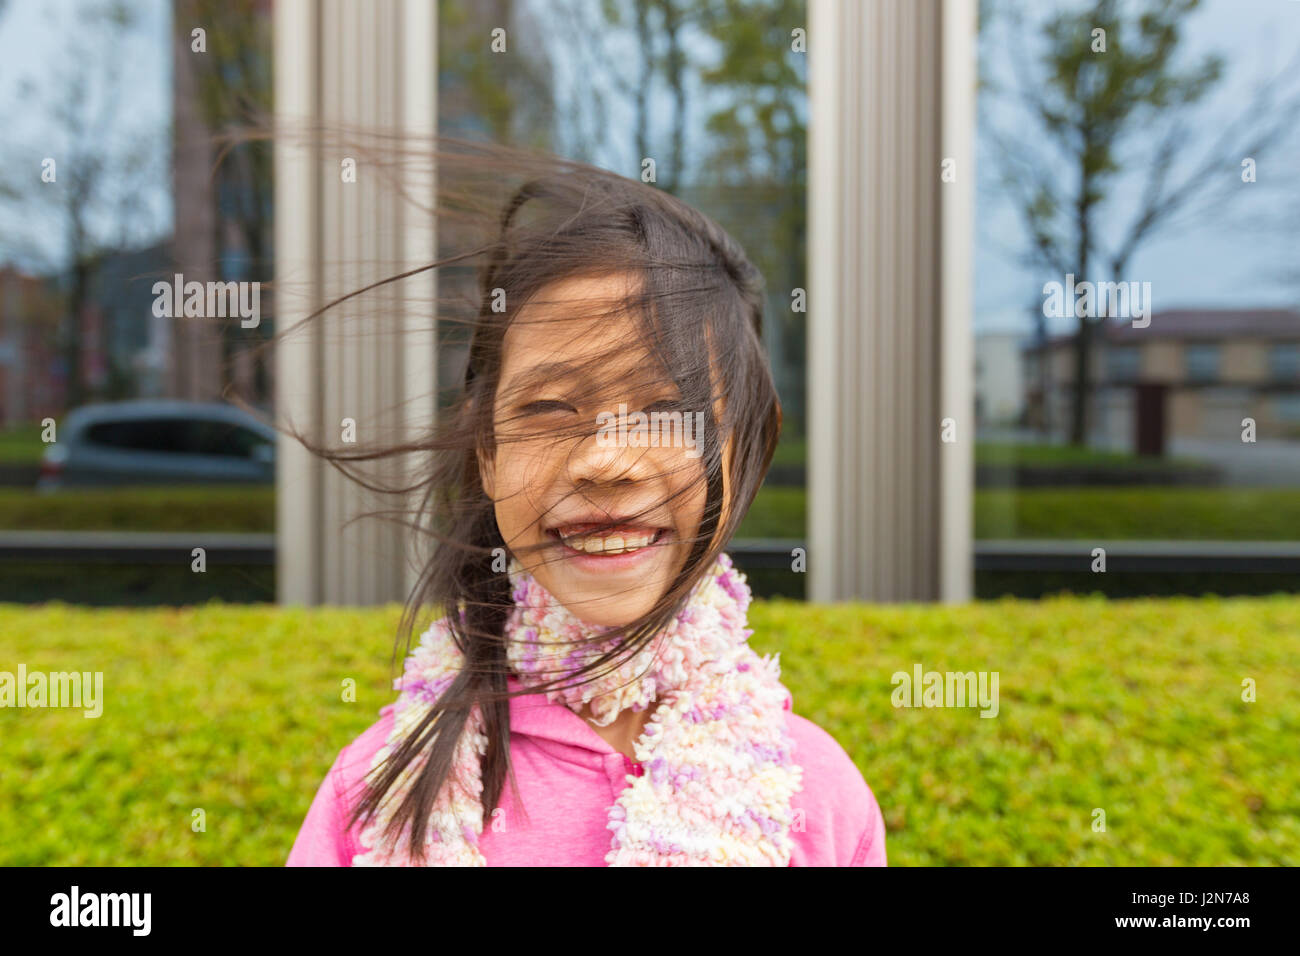 Side wind blowing happy and smiling asian's girl hair in a spring cold day, selective focus on the hair in front of the girl's face Stock Photo